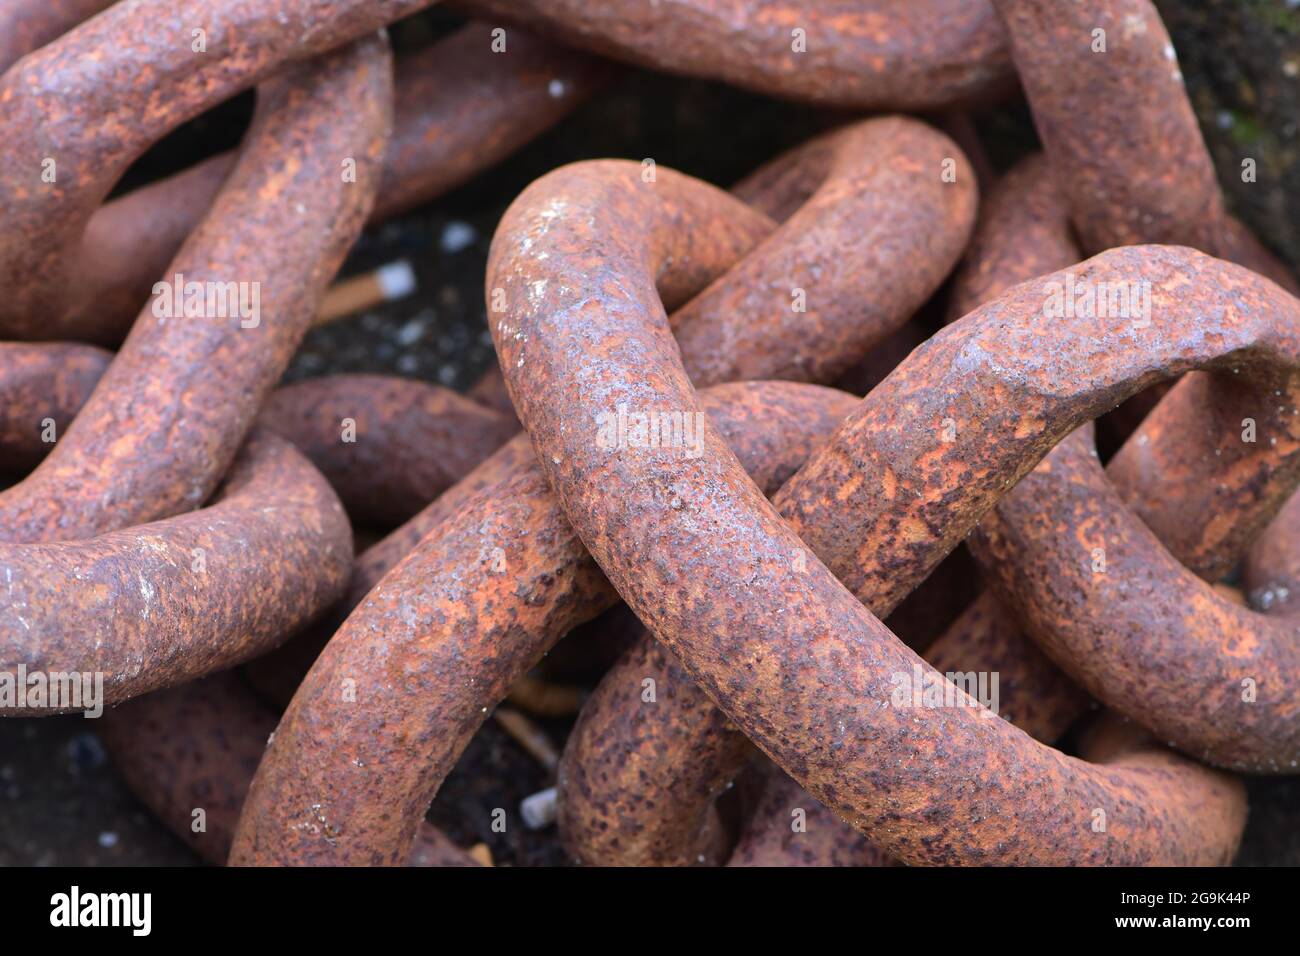 Pile of heavy links of thick chain with surface corrosion. Stock Photo